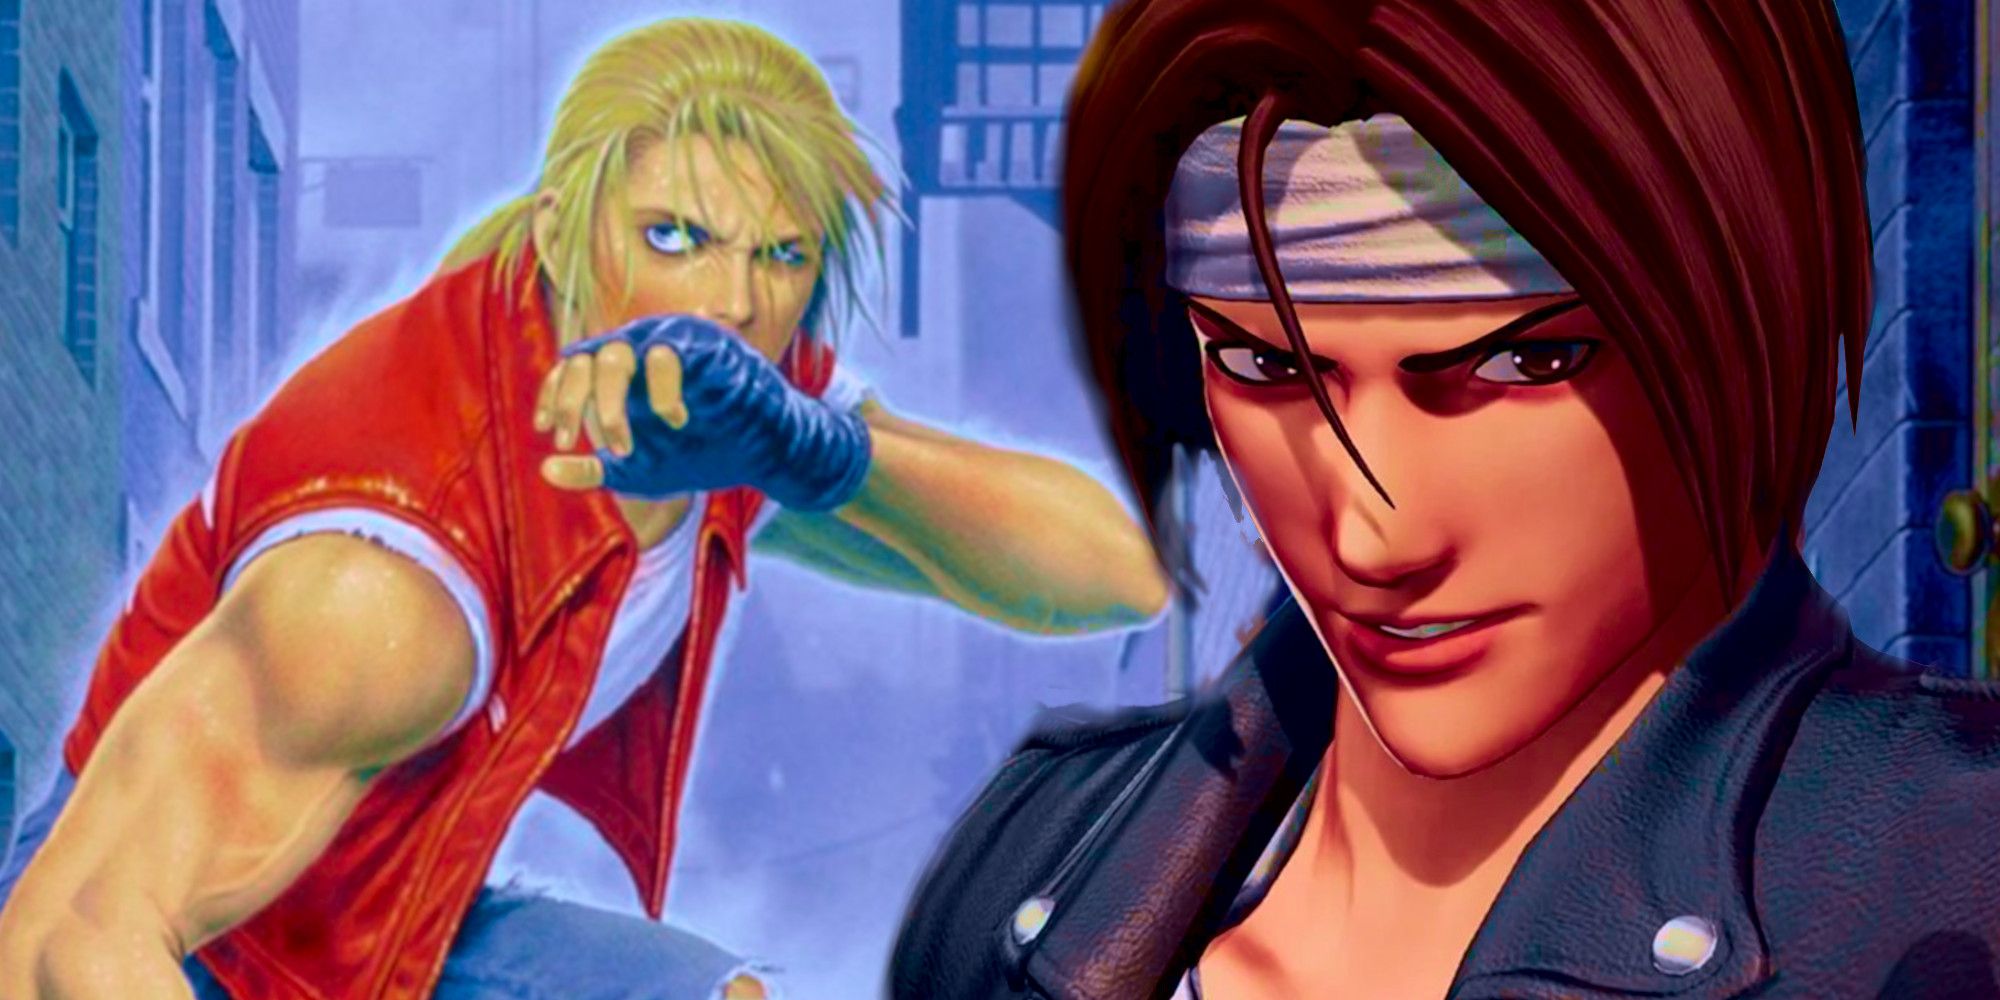 A Brief History On The King of Fighters — Too Much Gaming